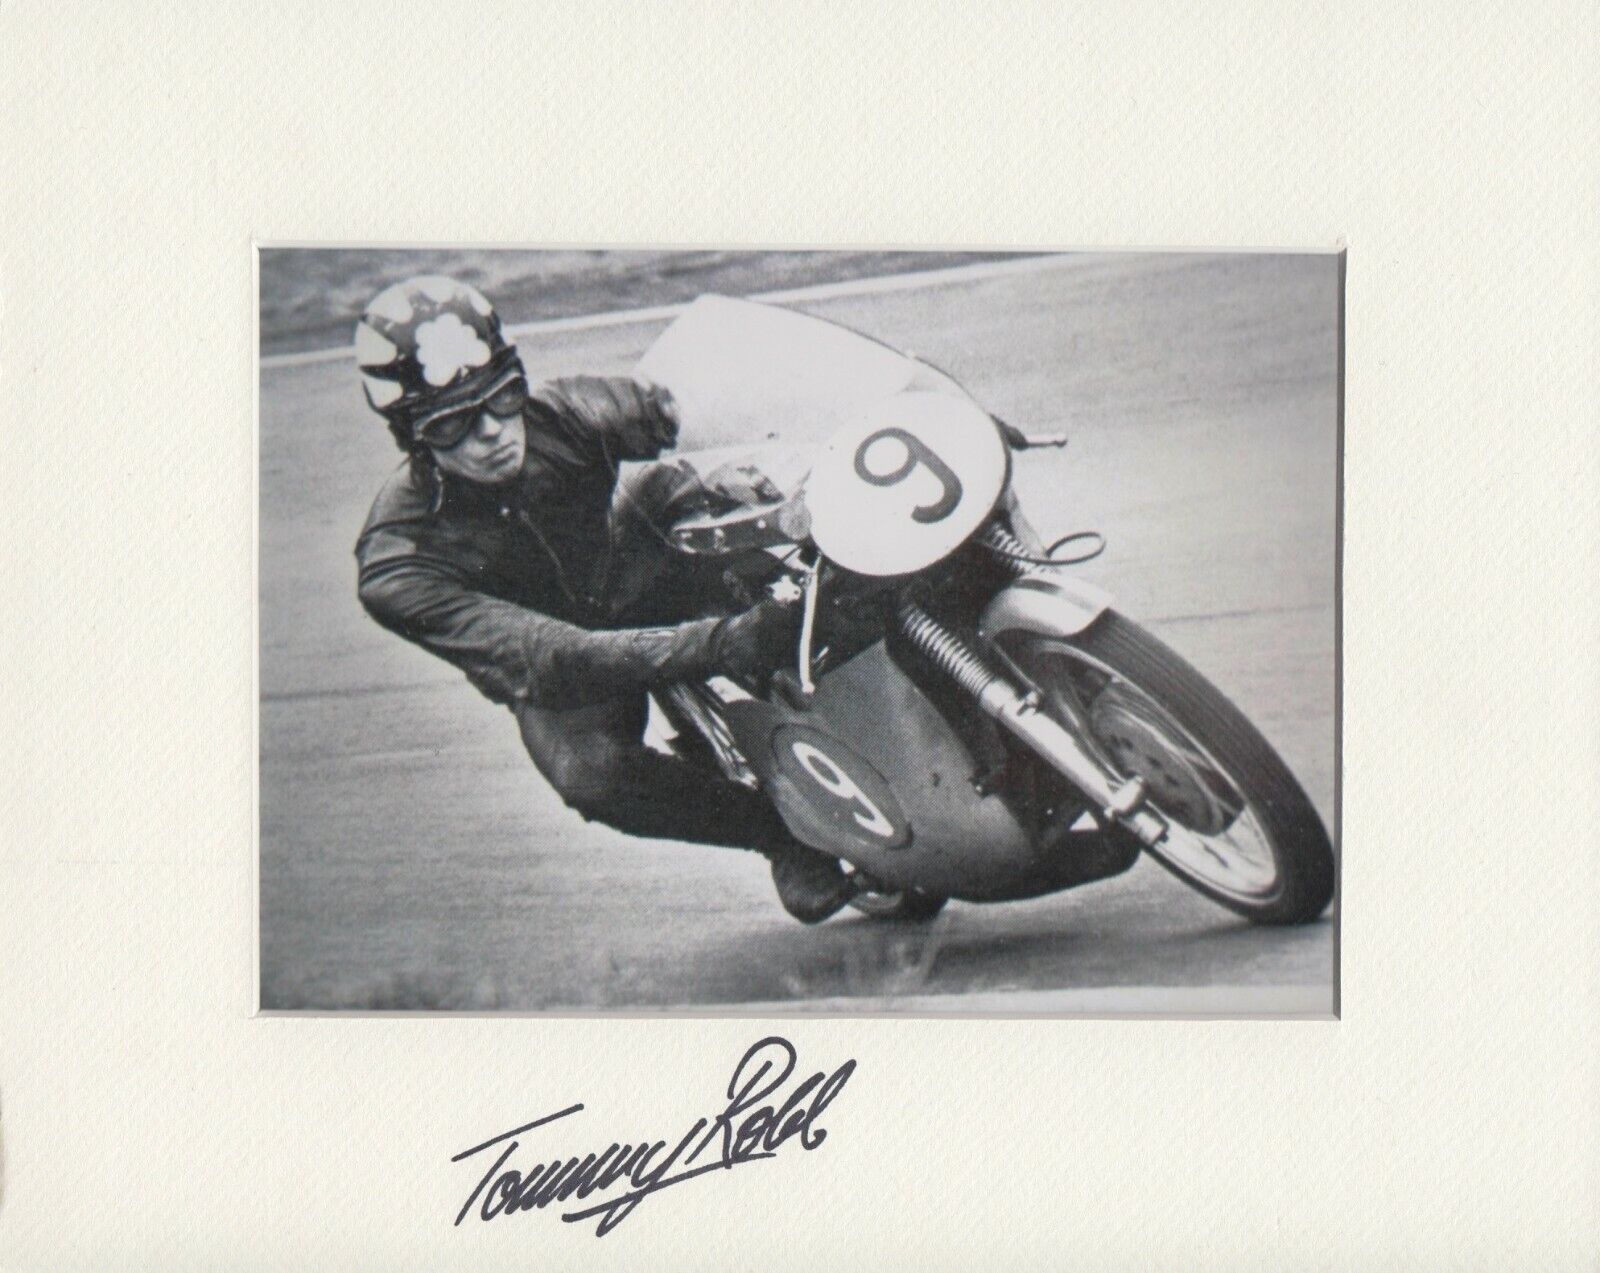 Tommy Robb Hand Signed 10x8 Mount Photo Poster painting Display MotoGP Autograph 3